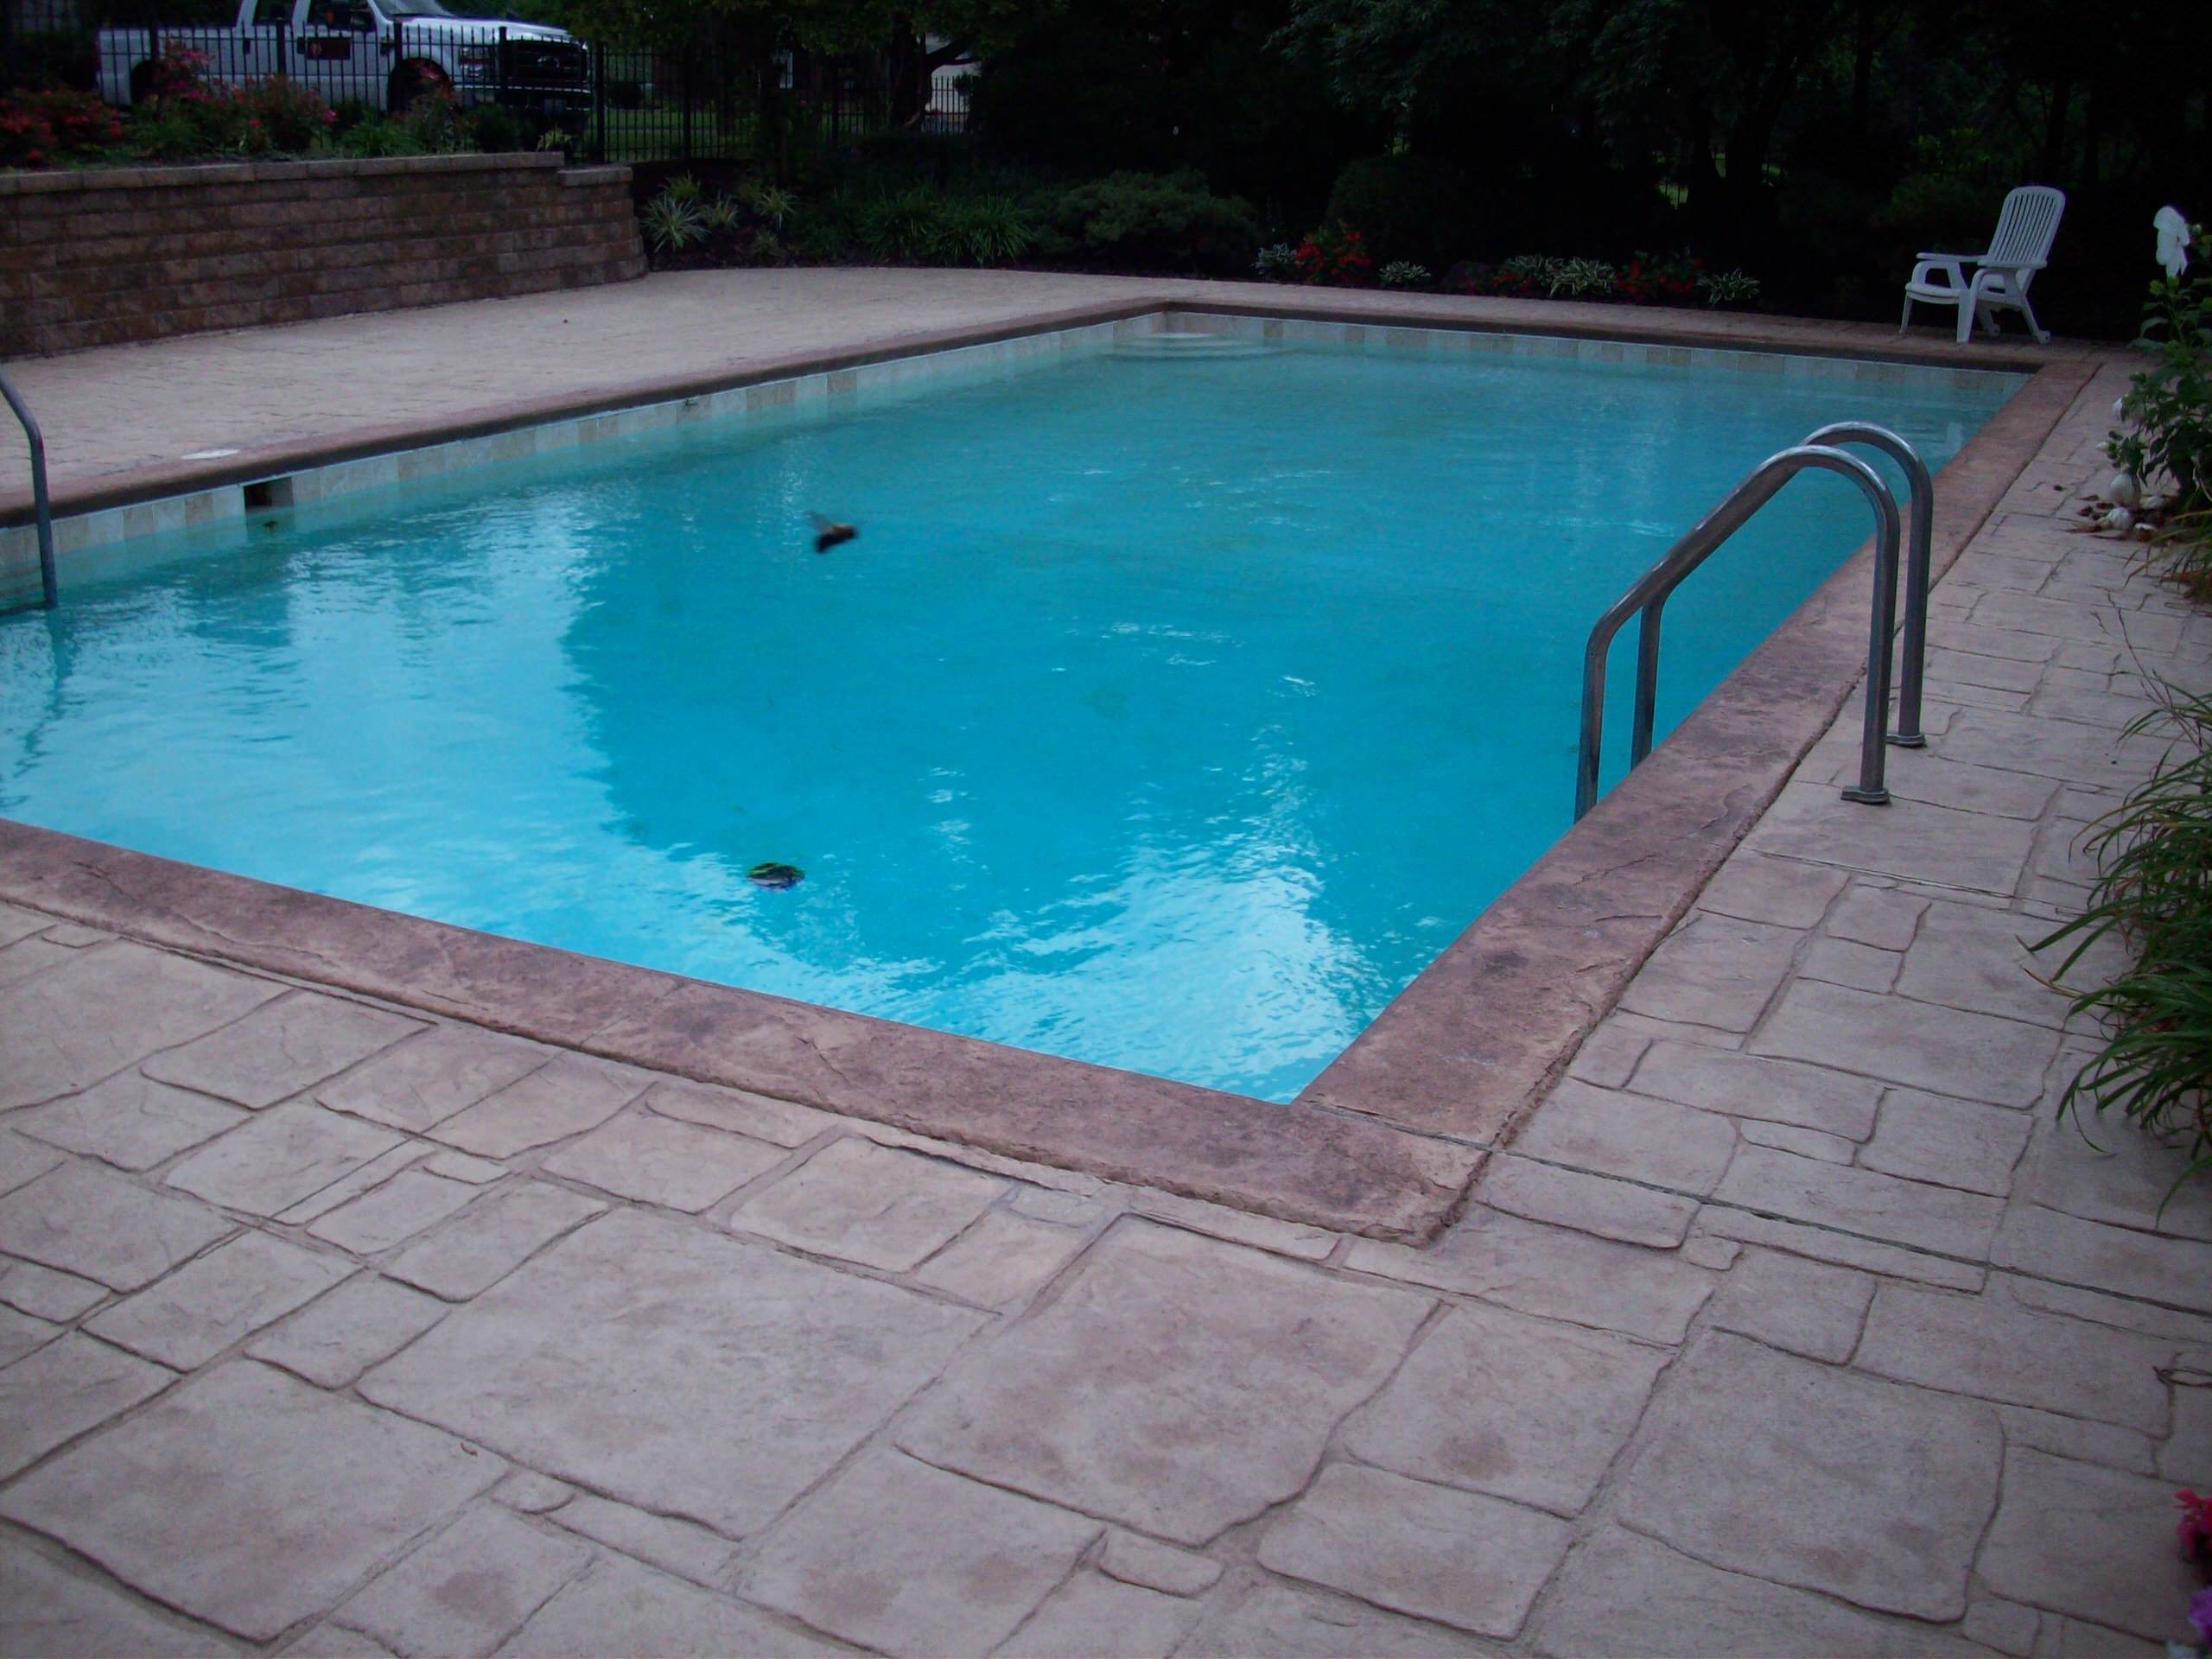 Town & Country, Missouri Stamped Concrete Pool Deck